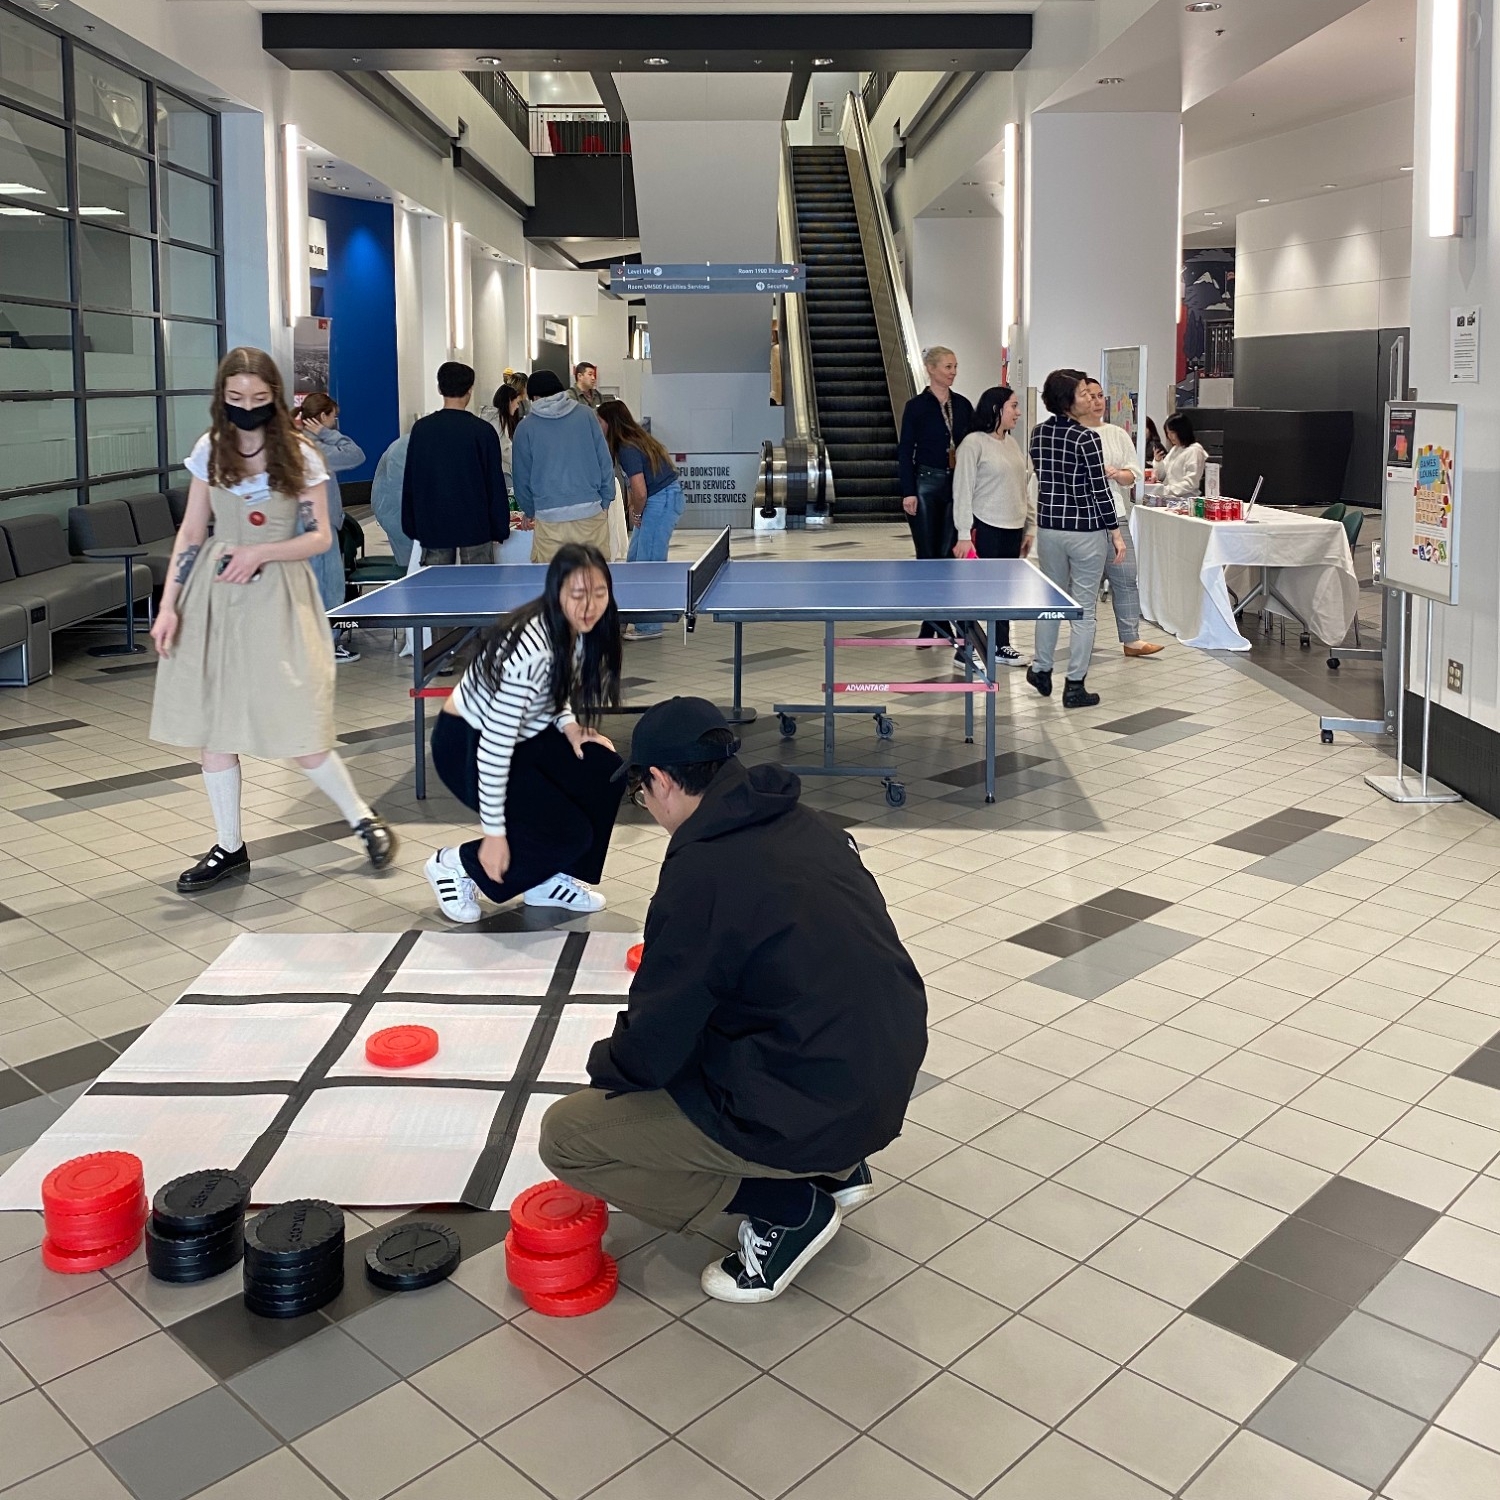 Three students playing giant Checkers with a ping pong table and multiple people in the background at Multilingual Week 2023 at Vancouver campus